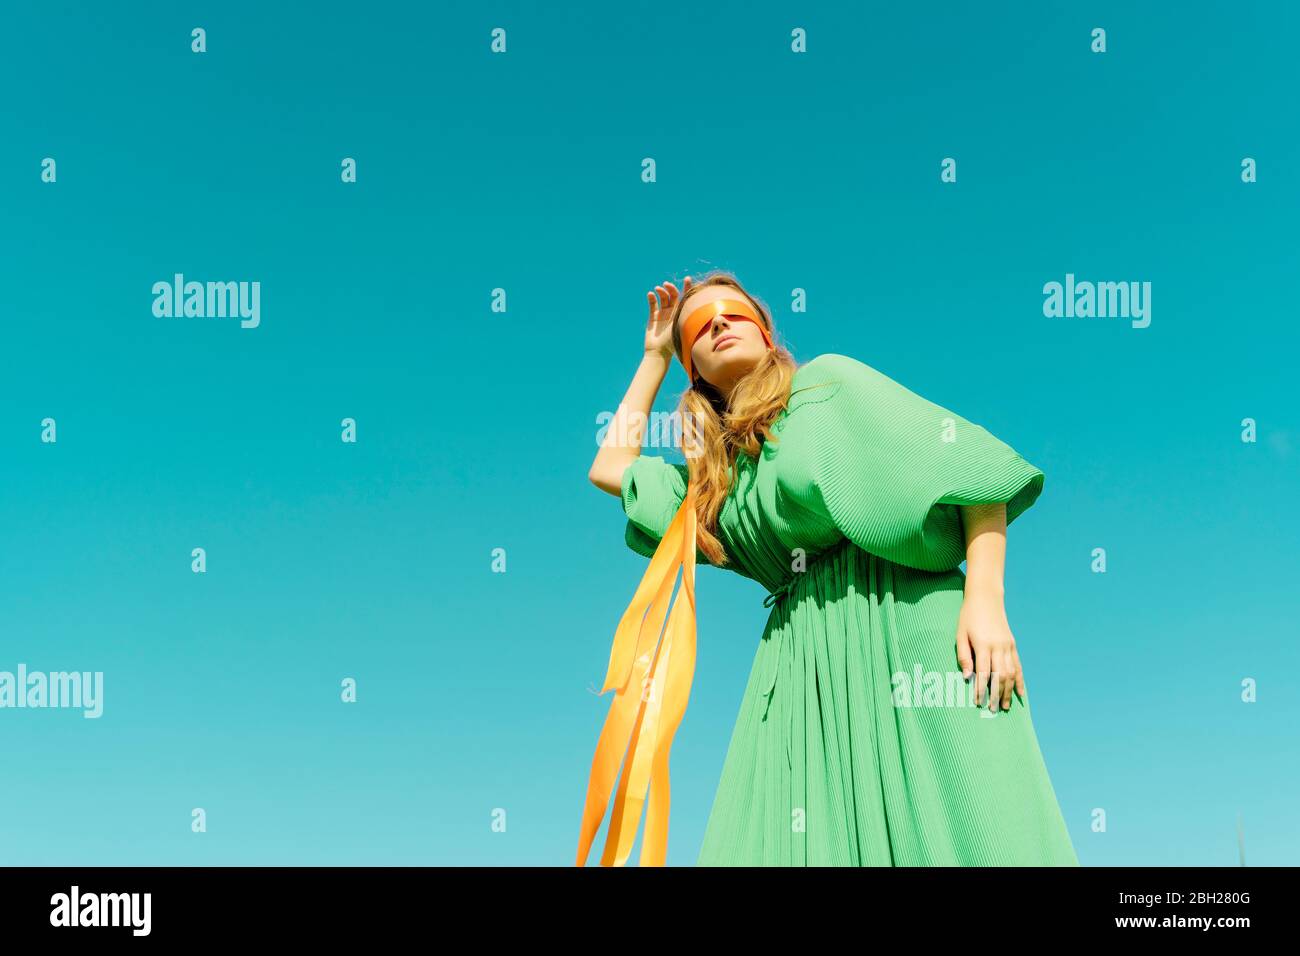 Blindfolded young woman wearing a green dress under blue sky Stock Photo